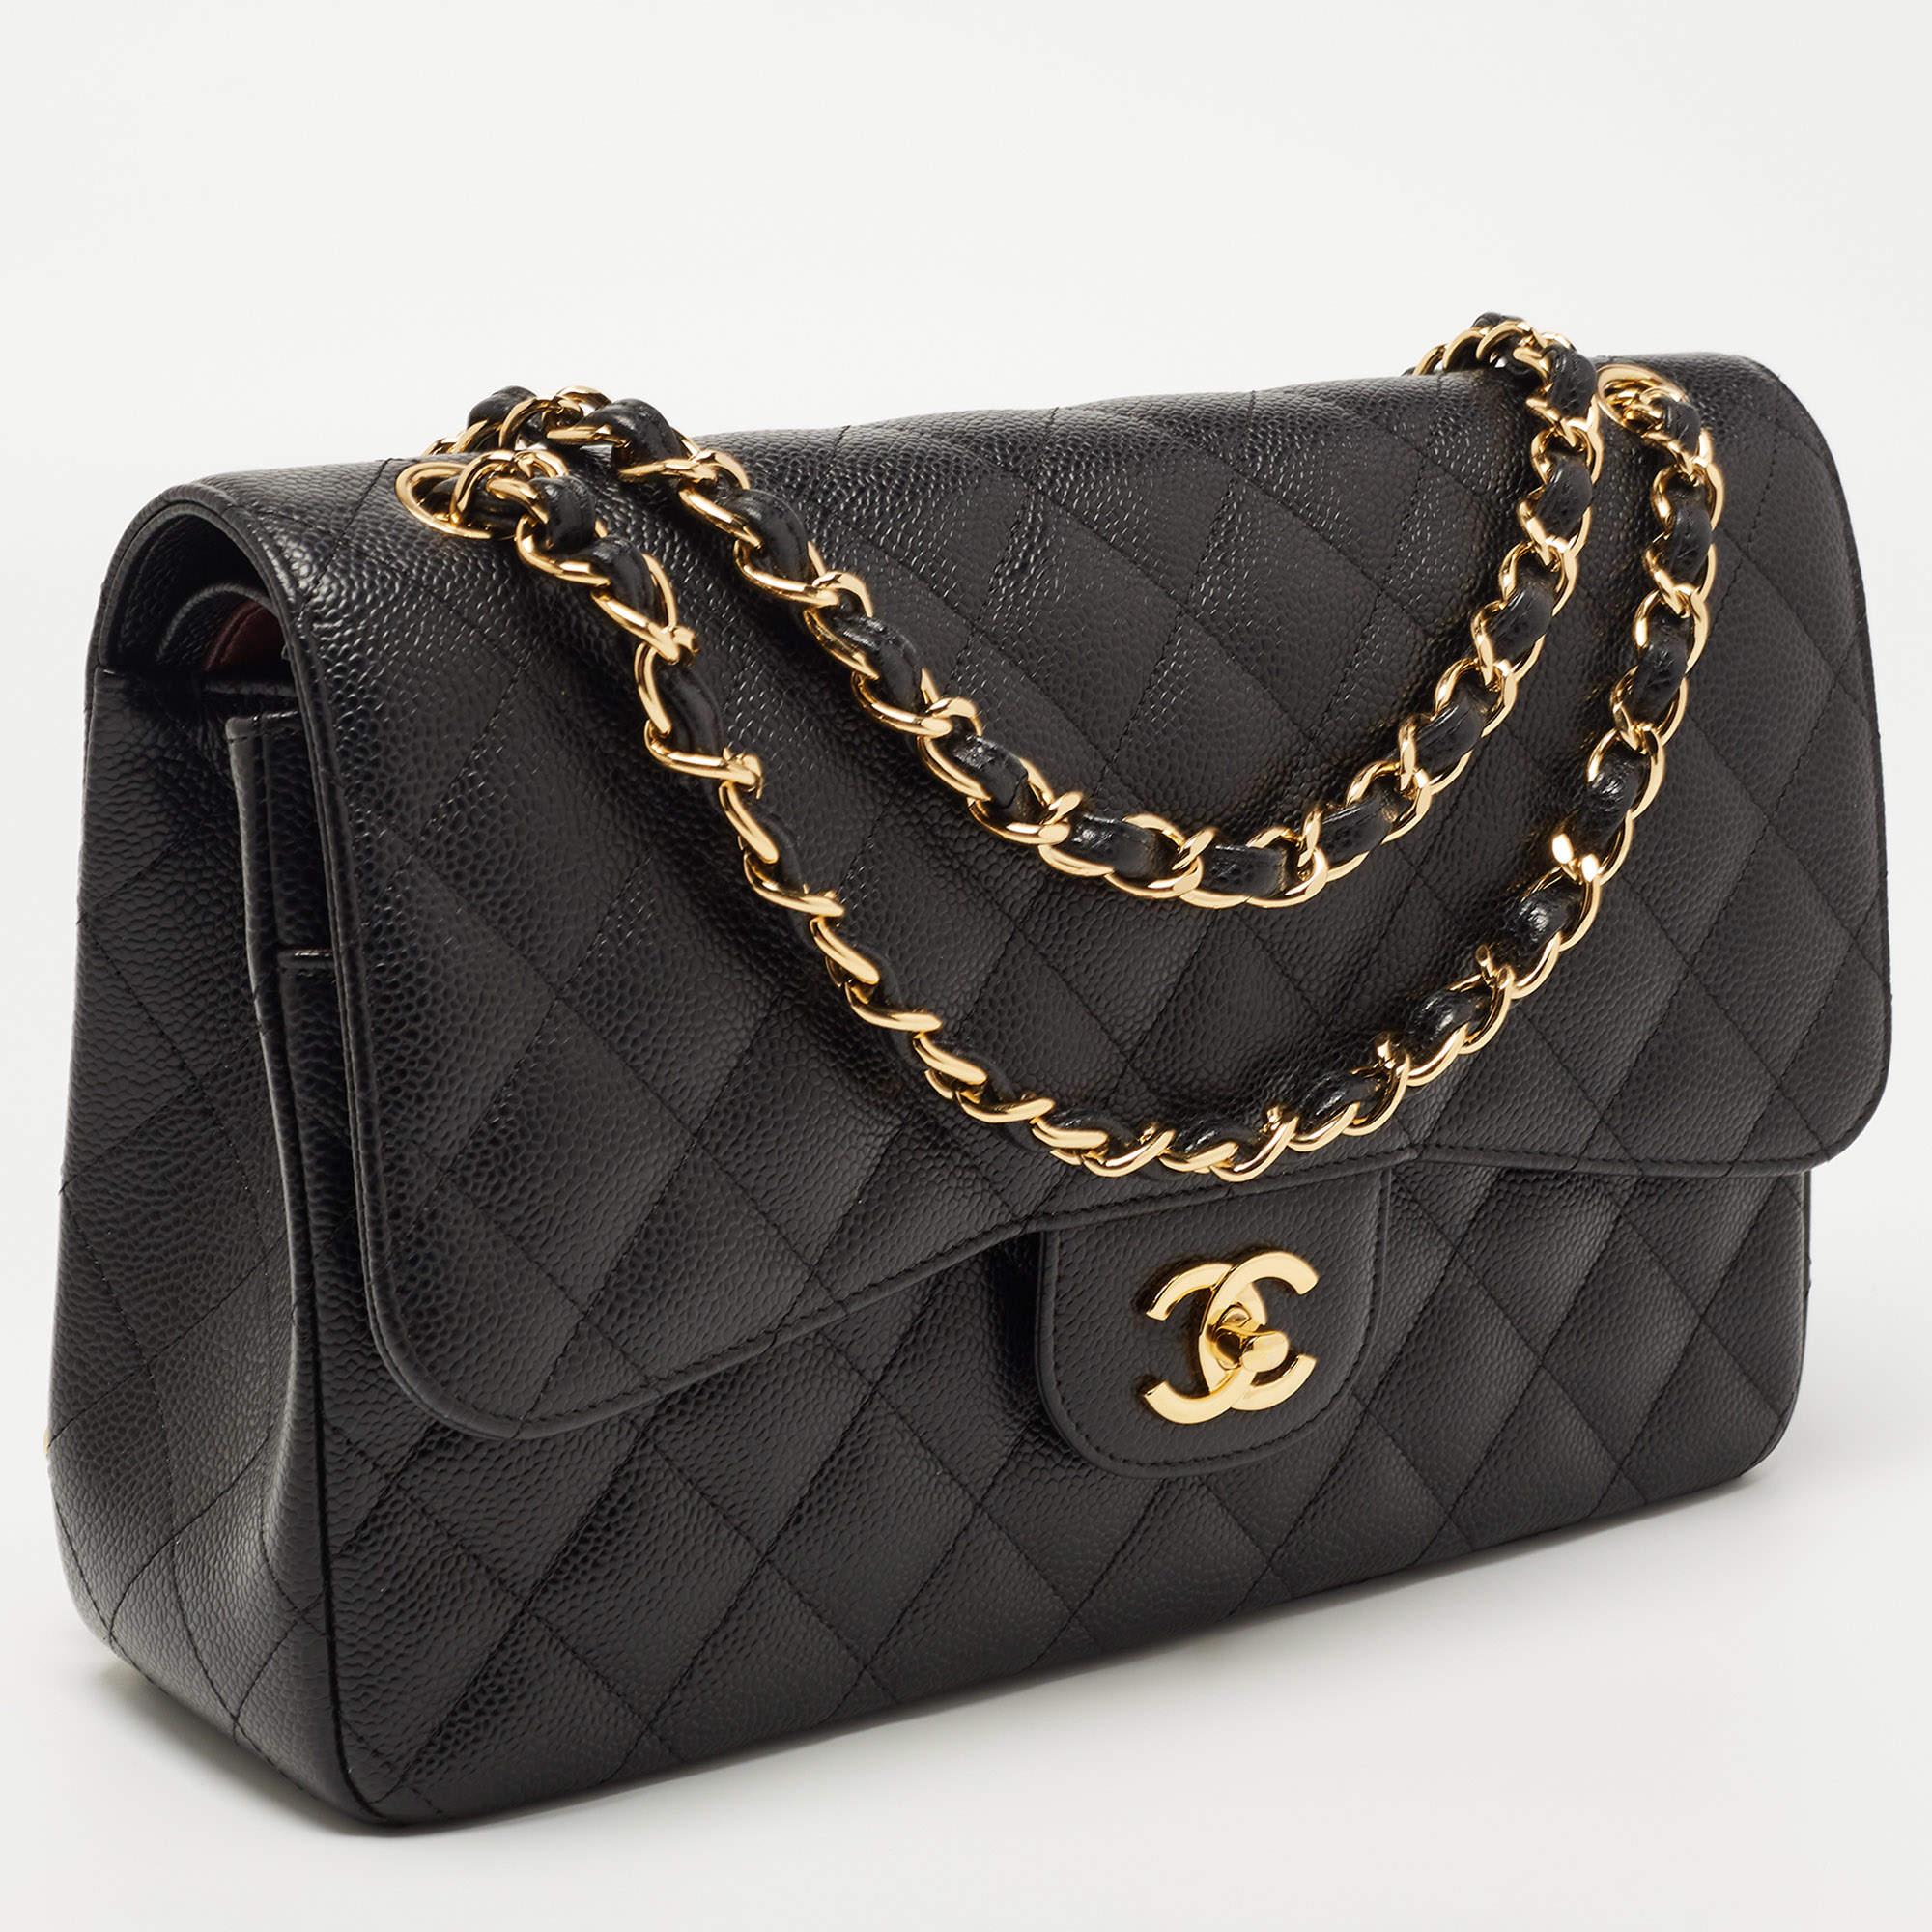 Chanel's luxurious Classic Flap bag is a must-have in a well-curated wardrobe! This stunning bag has a masterfully crafted leather exterior with gold-tone hardware and the iconic CC logo on the front. This Jumbo Classic Double Flap is complete with